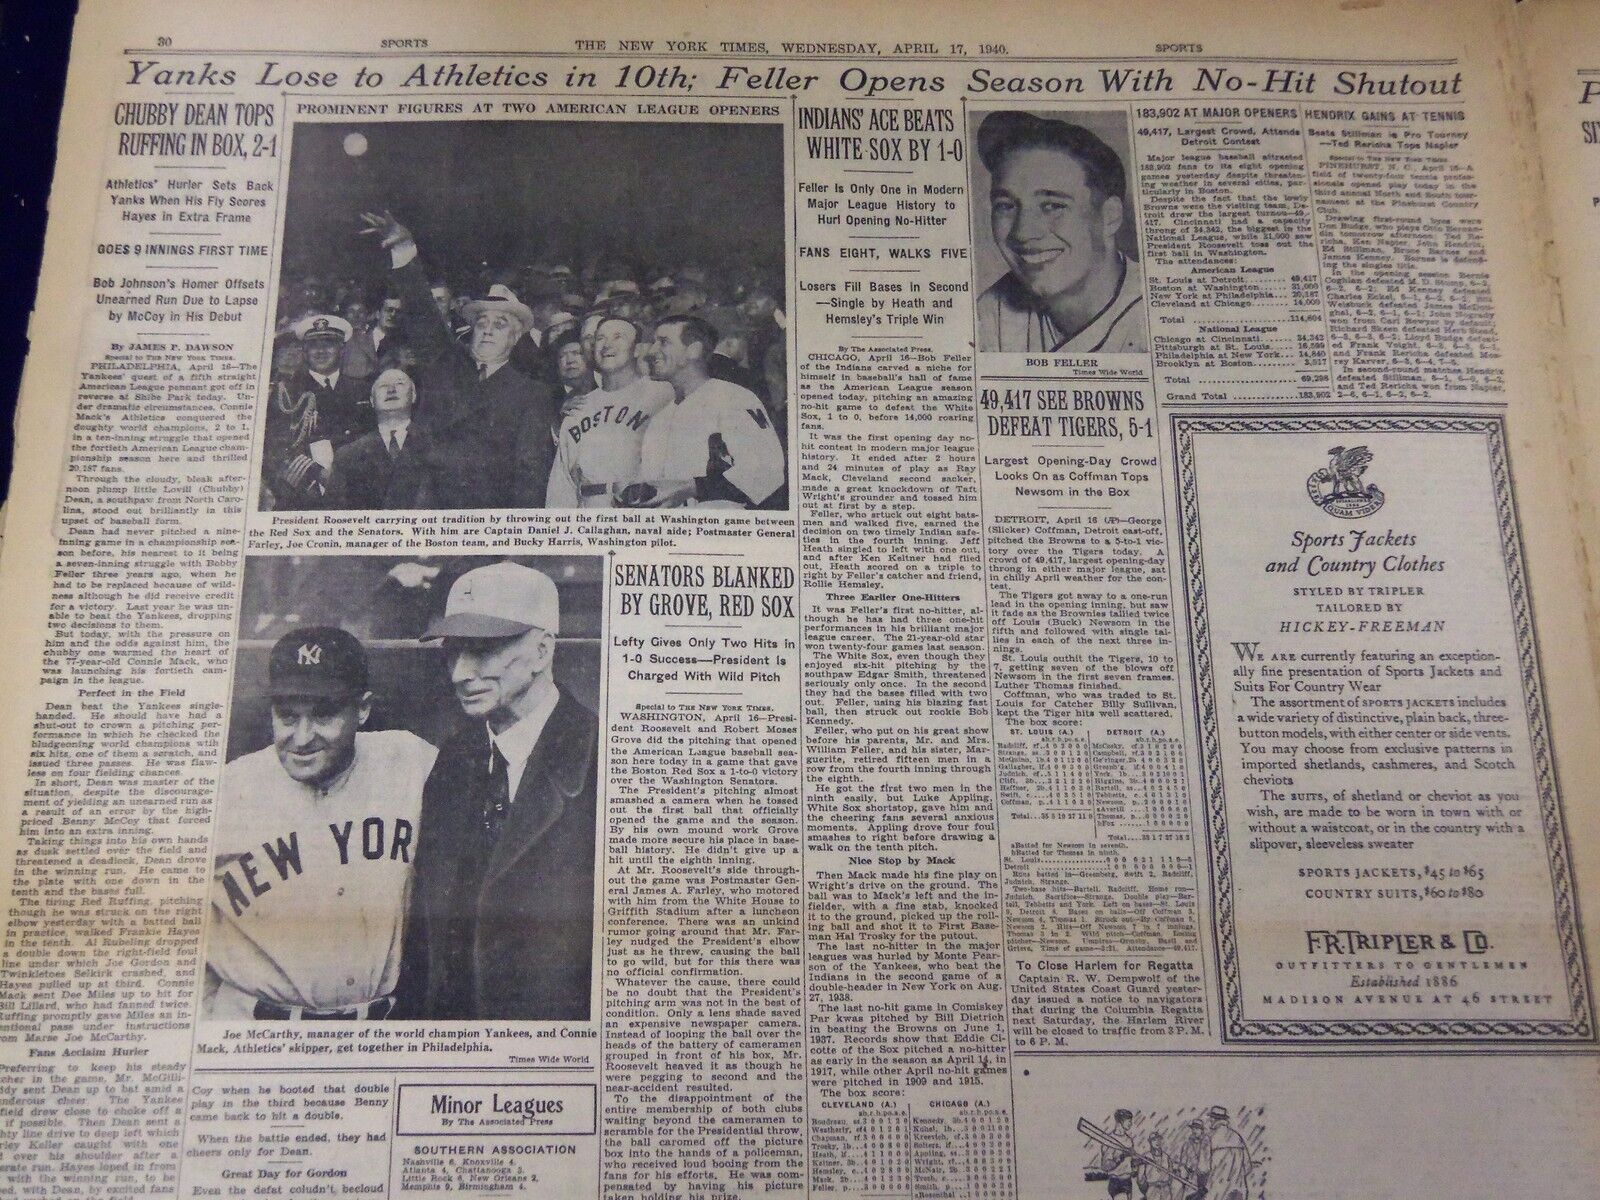 1940 APRIL 17 NEW YORK TIMES - FELLER OPENS WITH NO-HITTER - NT 2956